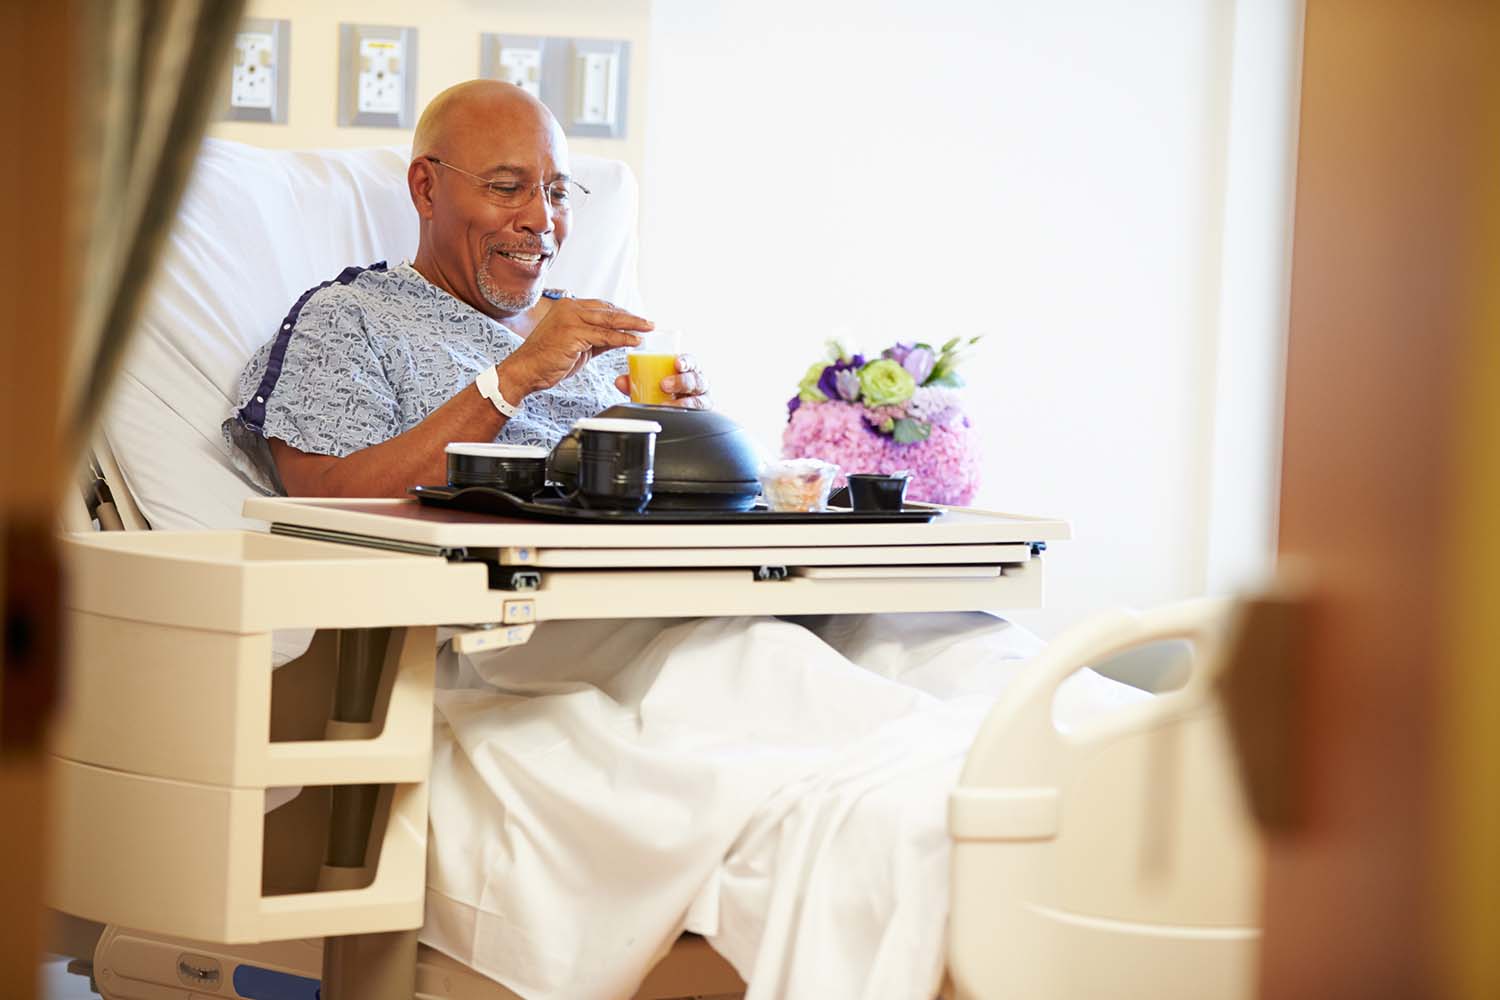 A male patient sits up in his hospital bed to eat a meal